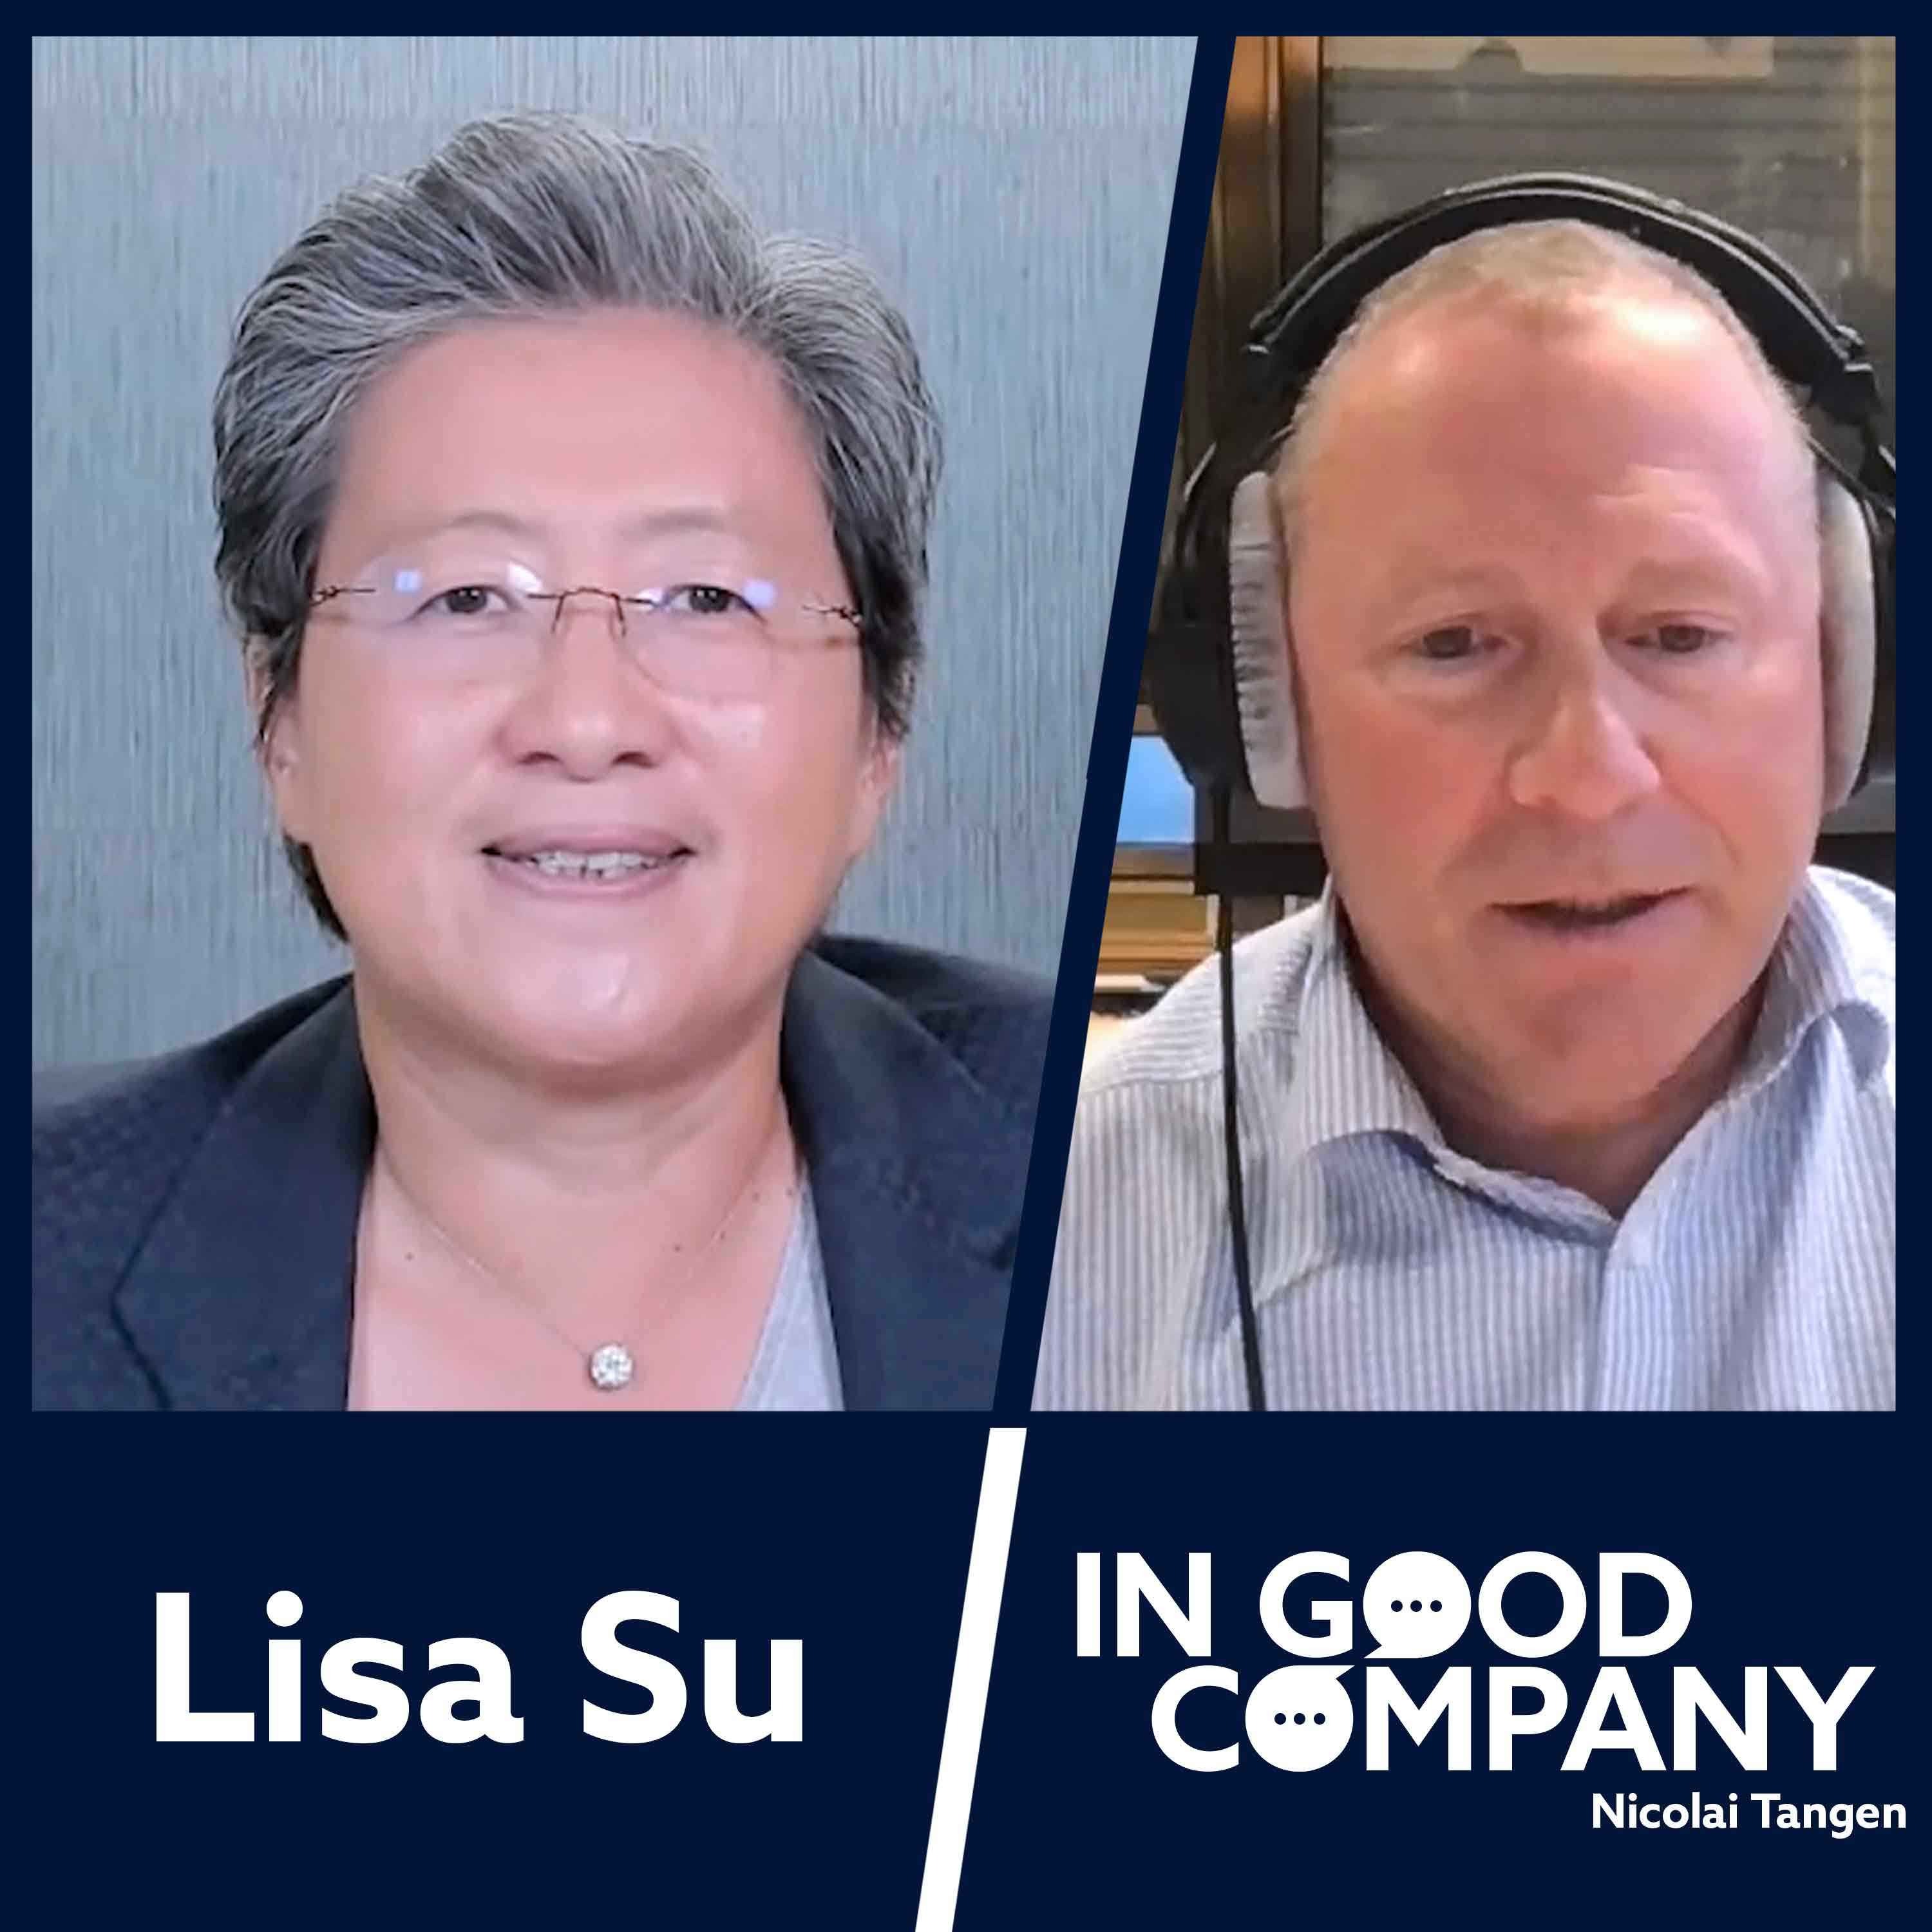 Lisa Su CEO of AMD by Norges Bank Investment Management